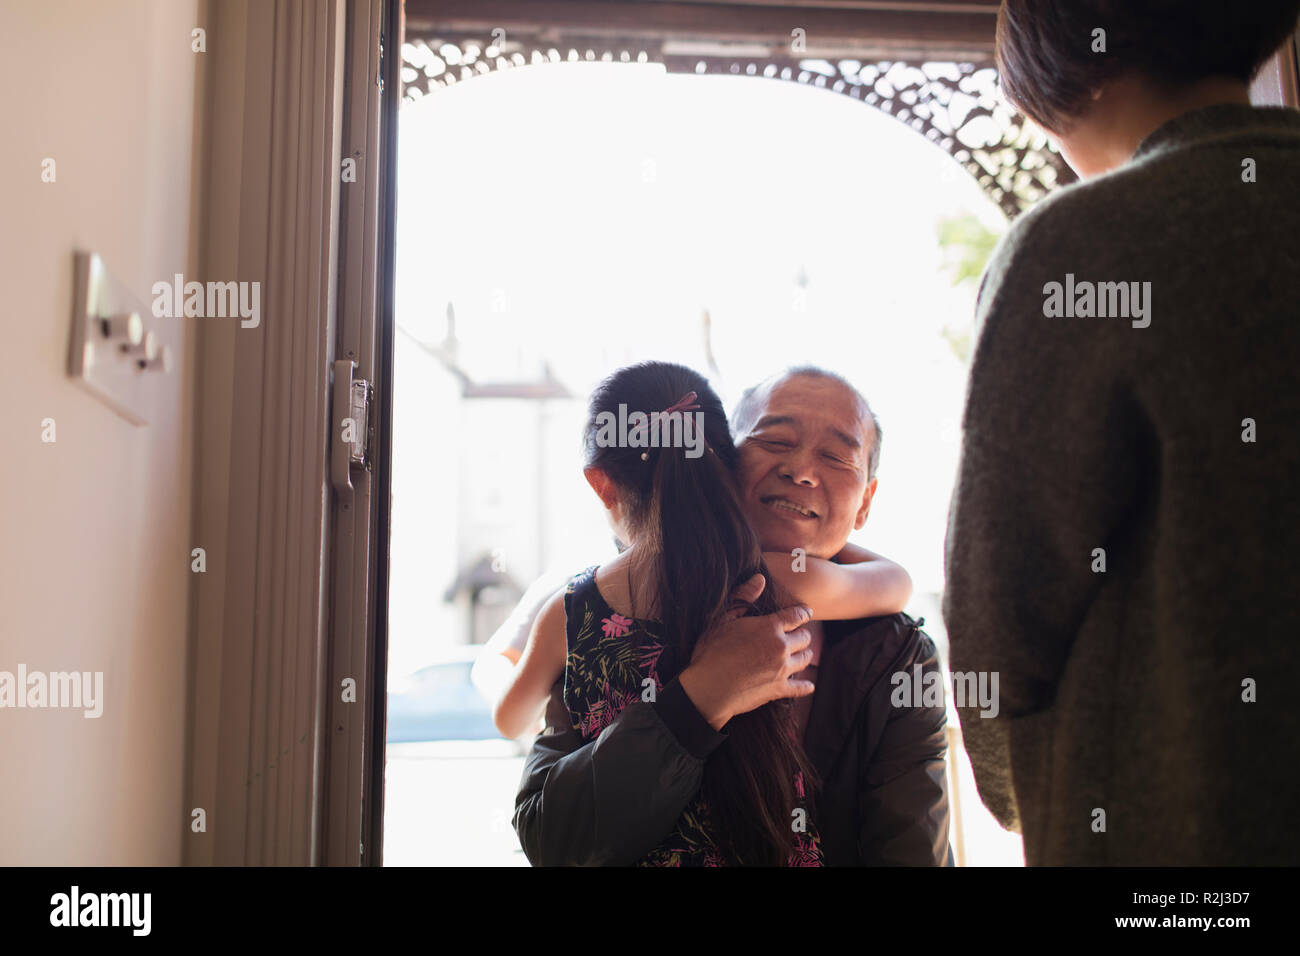 Affectionate granddaughter greeting and hugging grandfather in doorway Stock Photo